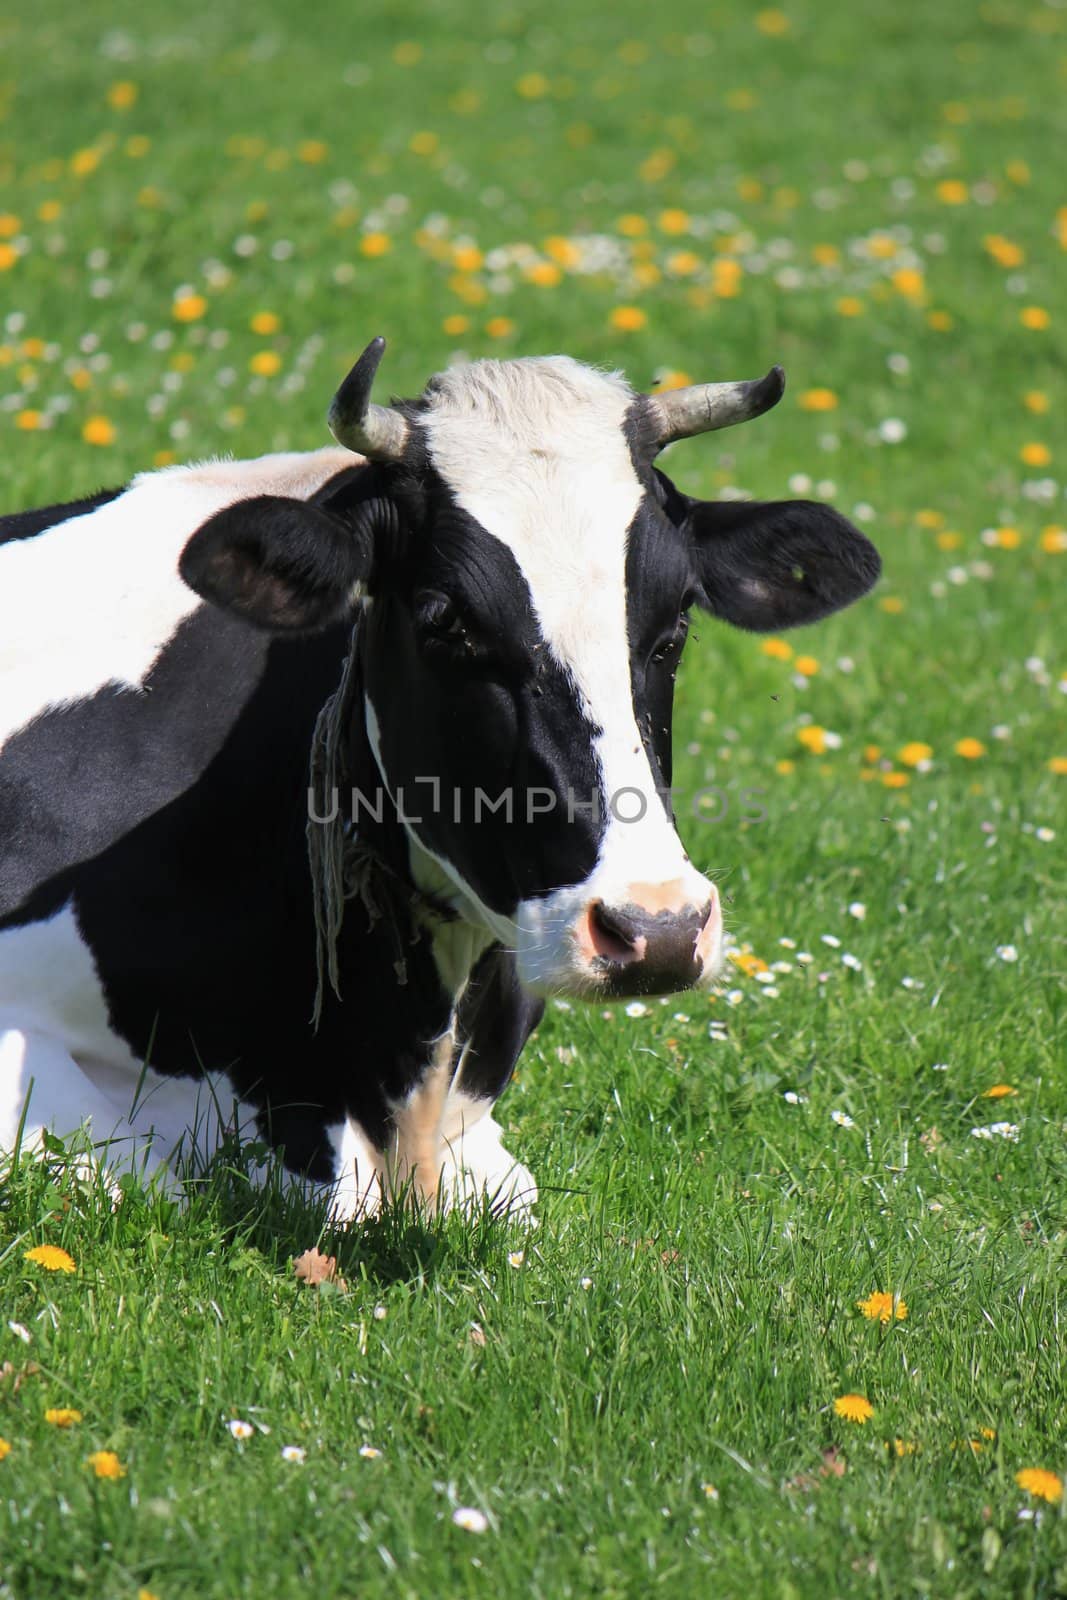 Portrait of a black and white famous cow of Fribourg canton, Switzerland, resting lying in a meadow of green grass and flowers